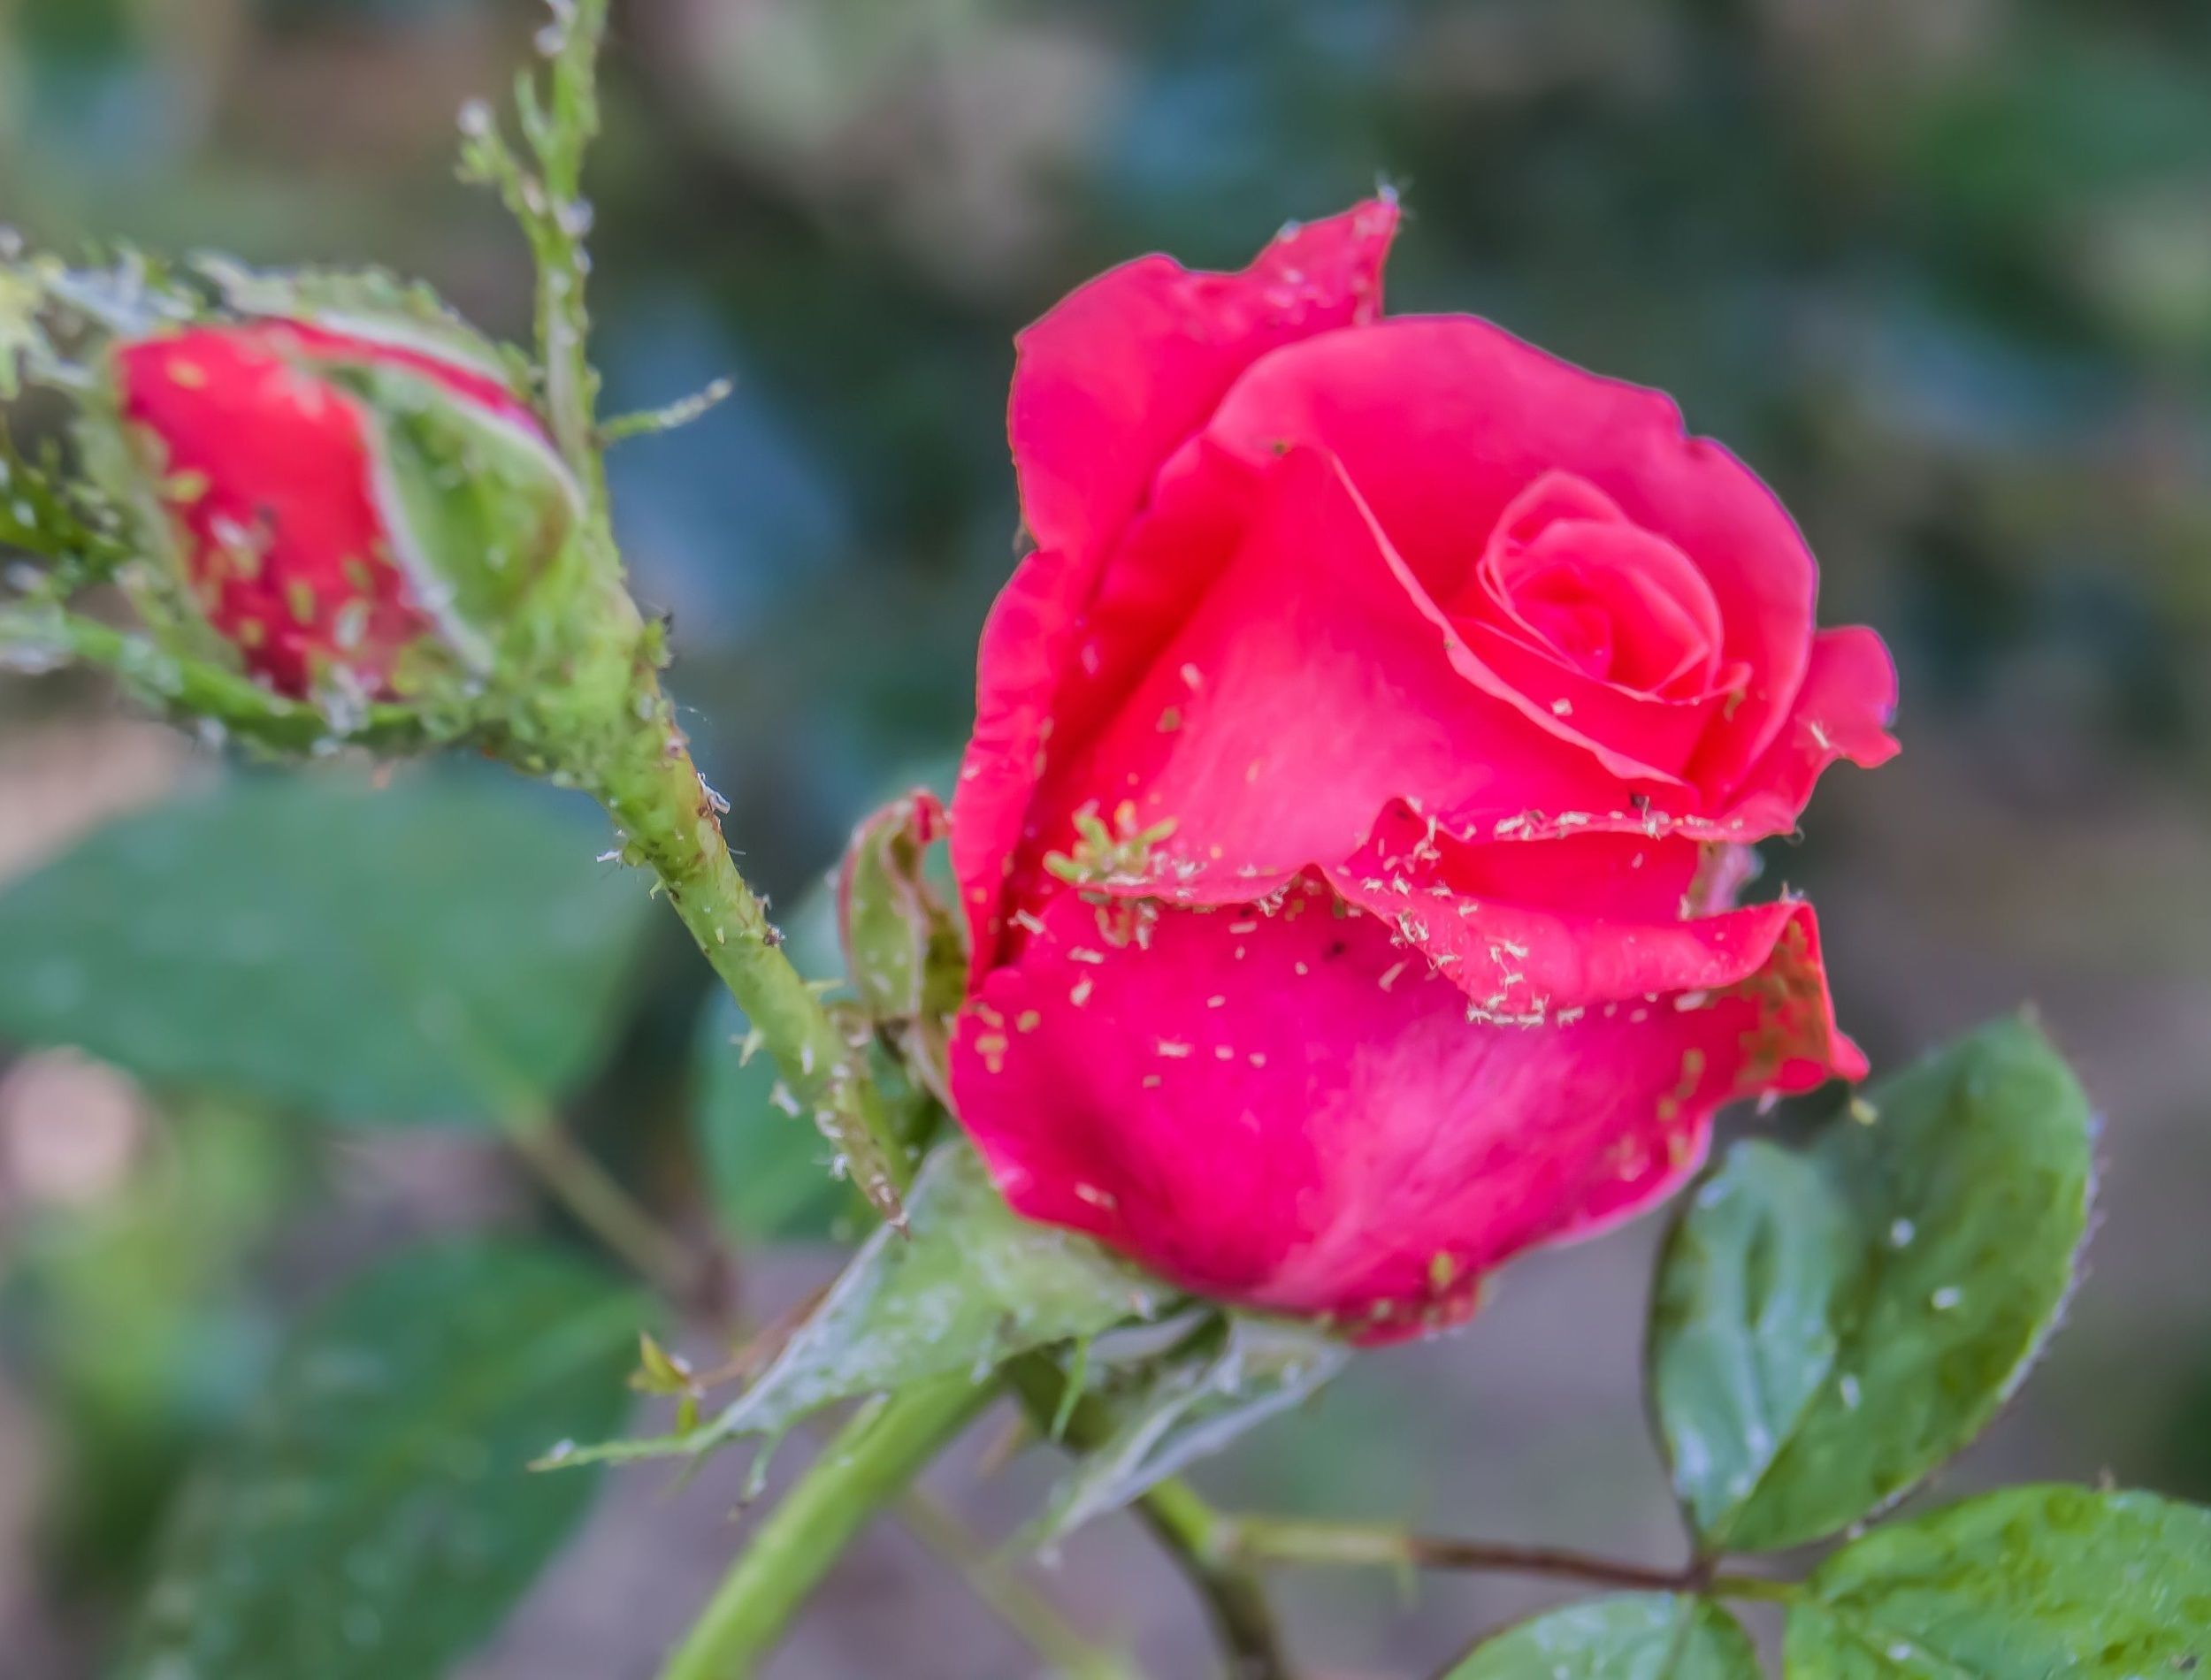 Aphids on rose flowers in nature